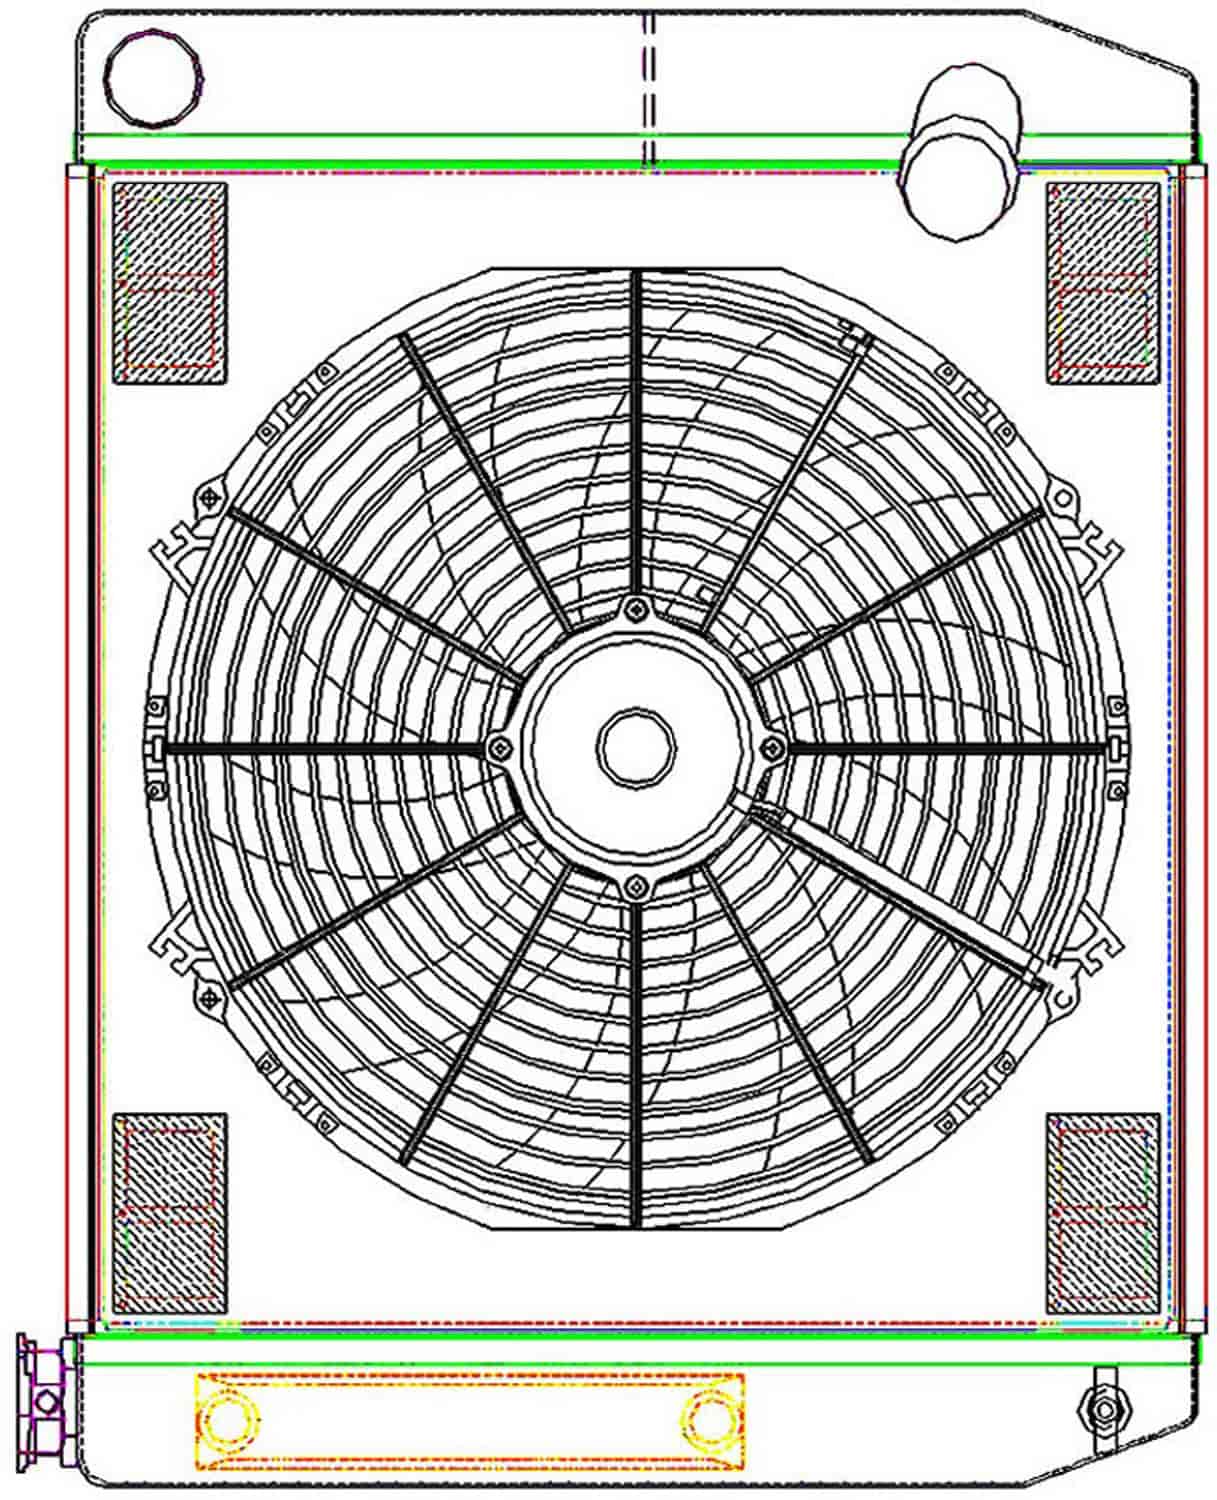 MegaCool ComboUnit Universal Fit Radiator and Fan Dual Pass Crossflow Design 24" x 19" with Transmission Cooler